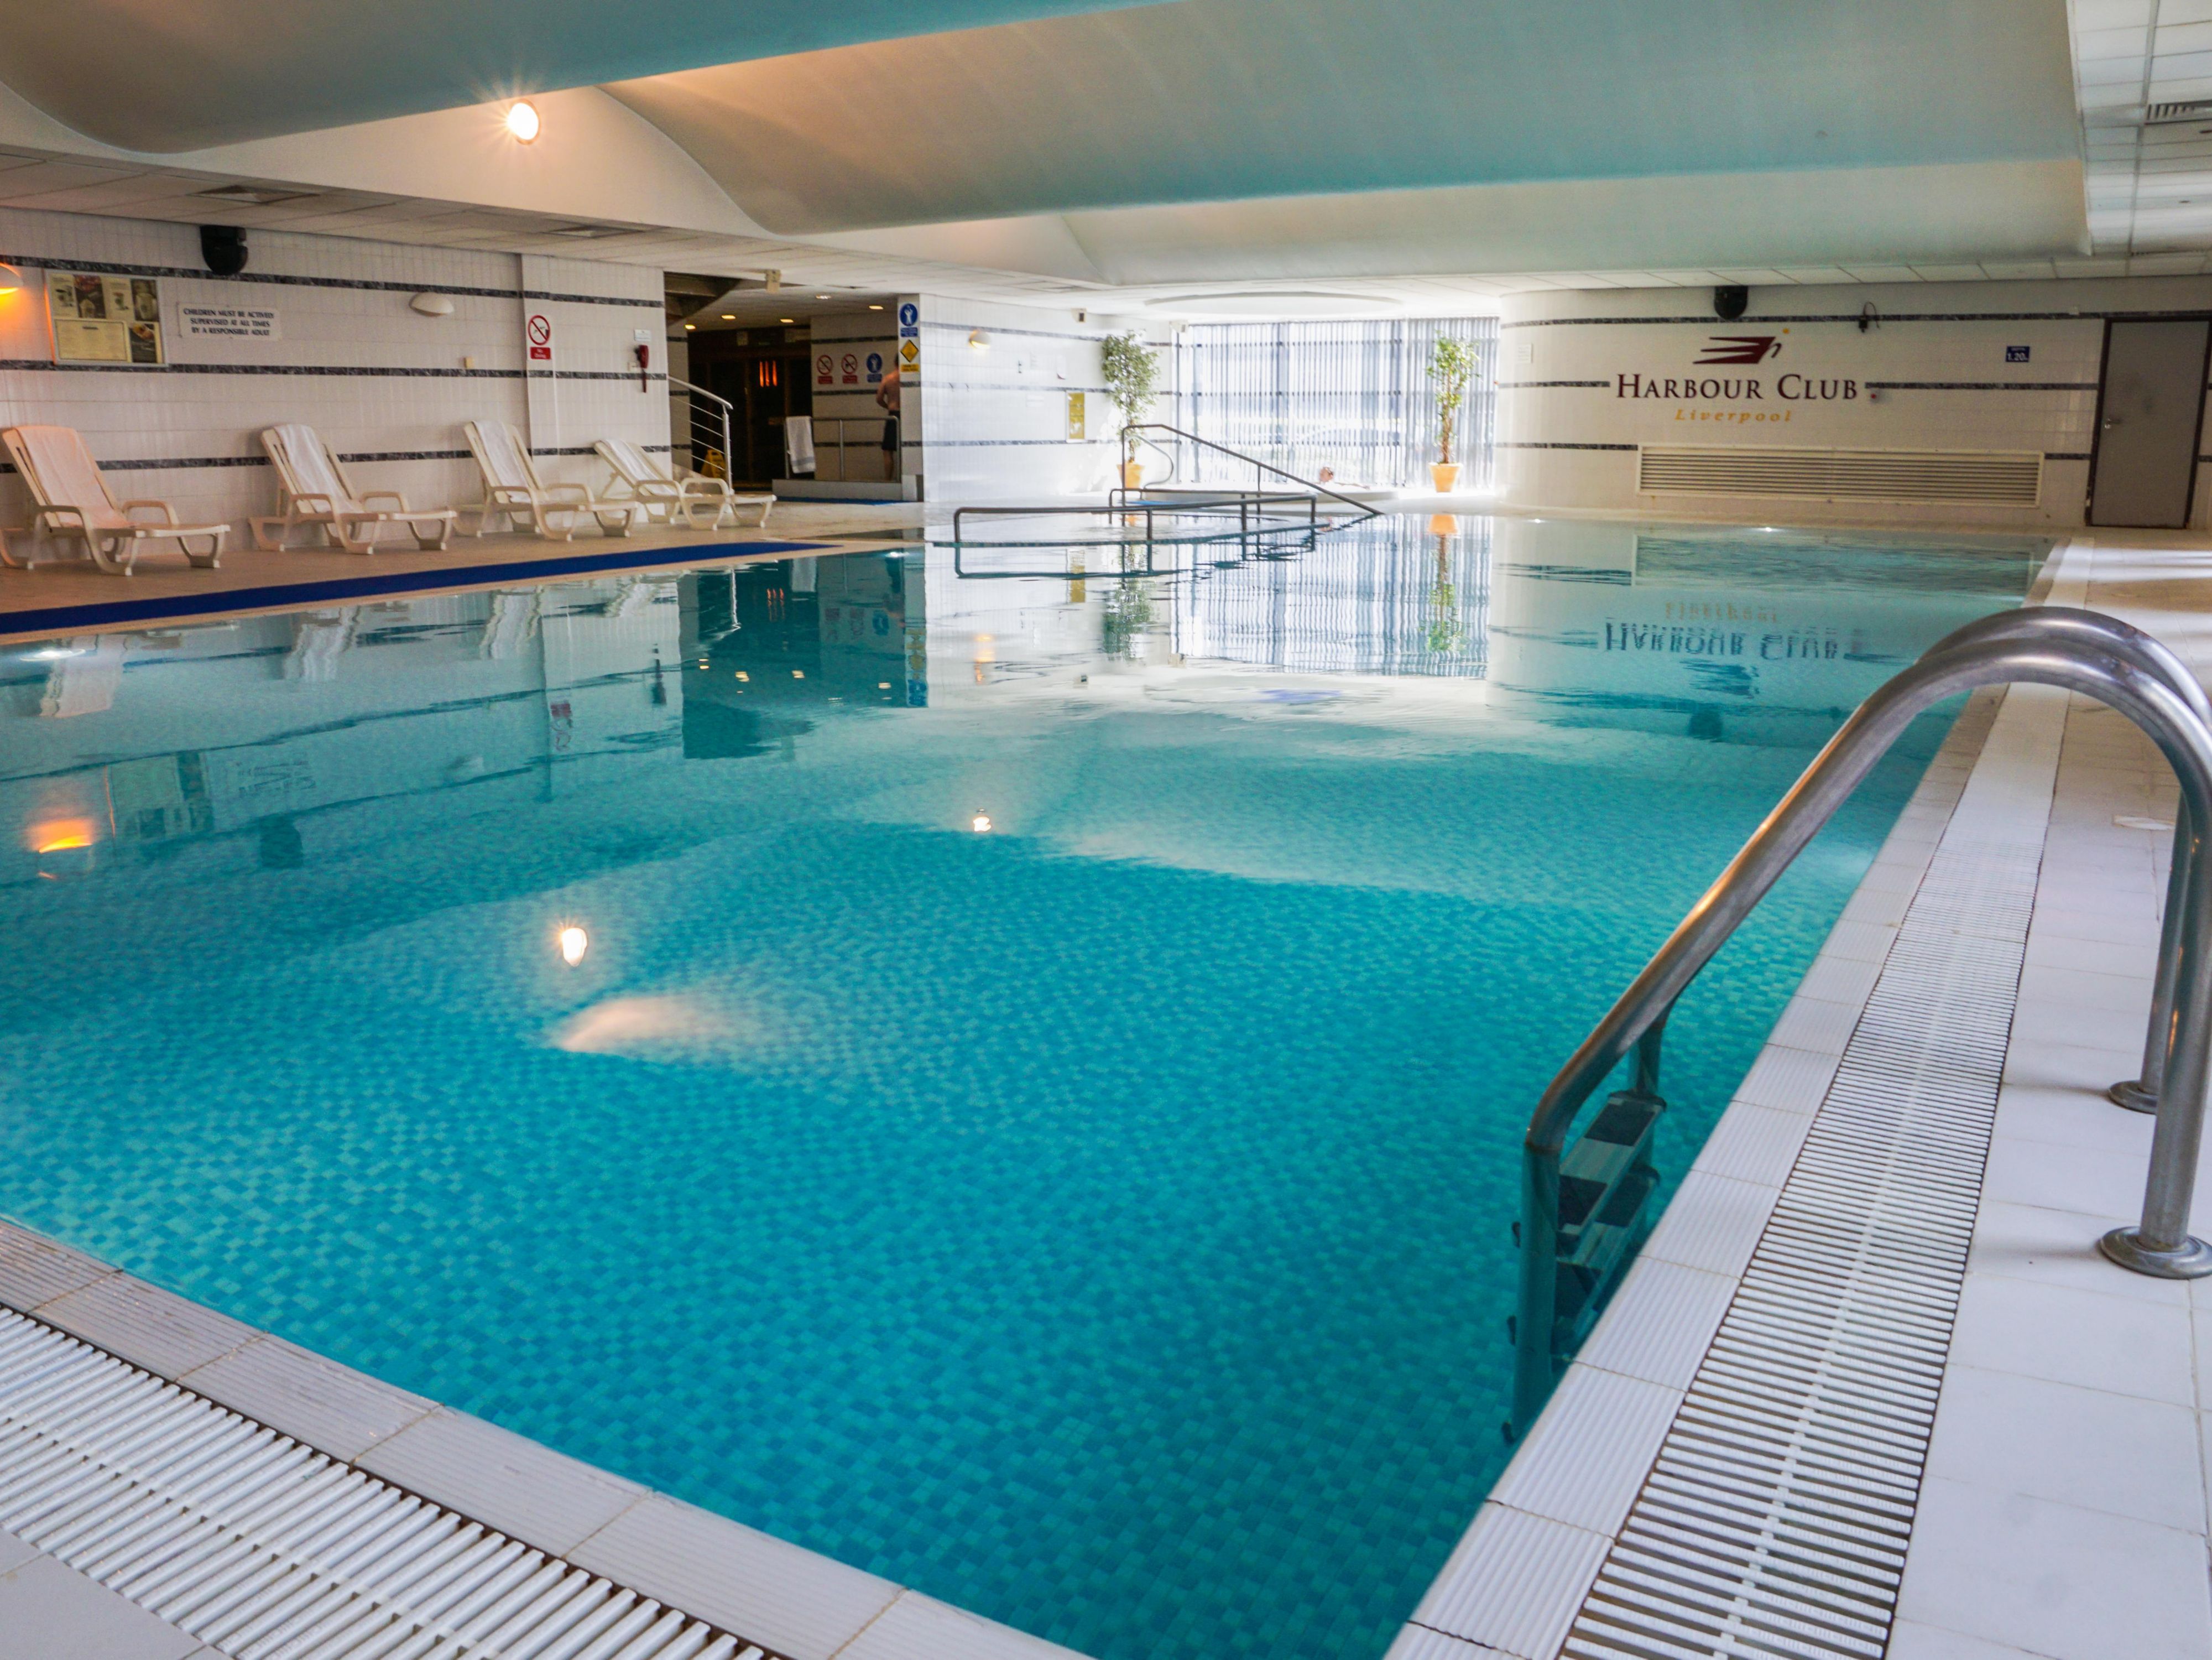 Our gym and pool are open Monday to Friday from 6am to 10pm and Saturday to Sunday 7am to 9pm
With spectacular views across the River Mersey,
Children swim times
Monday to Thursday from 9am to12noon and 2pm to 6pm
Friday from 9am to12noon and 2pm to 8pm
Saturday to Sunday 8am to 7pm